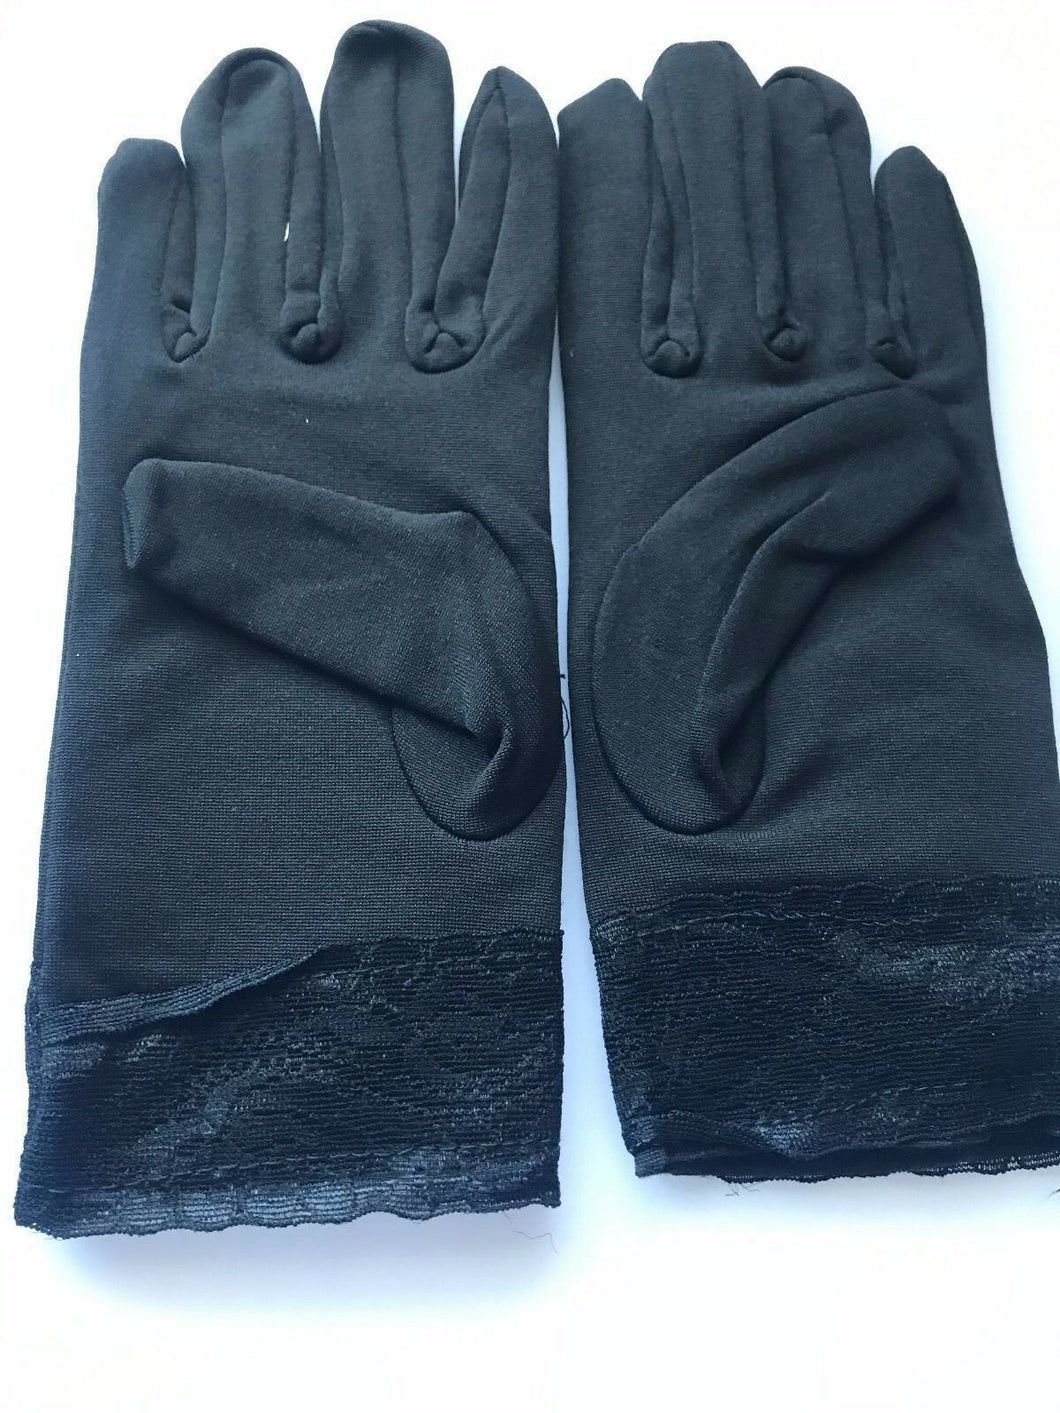 Women Lady Fleece Warm Thermal Lace Trim Party short Costume Gloves Mittens G213